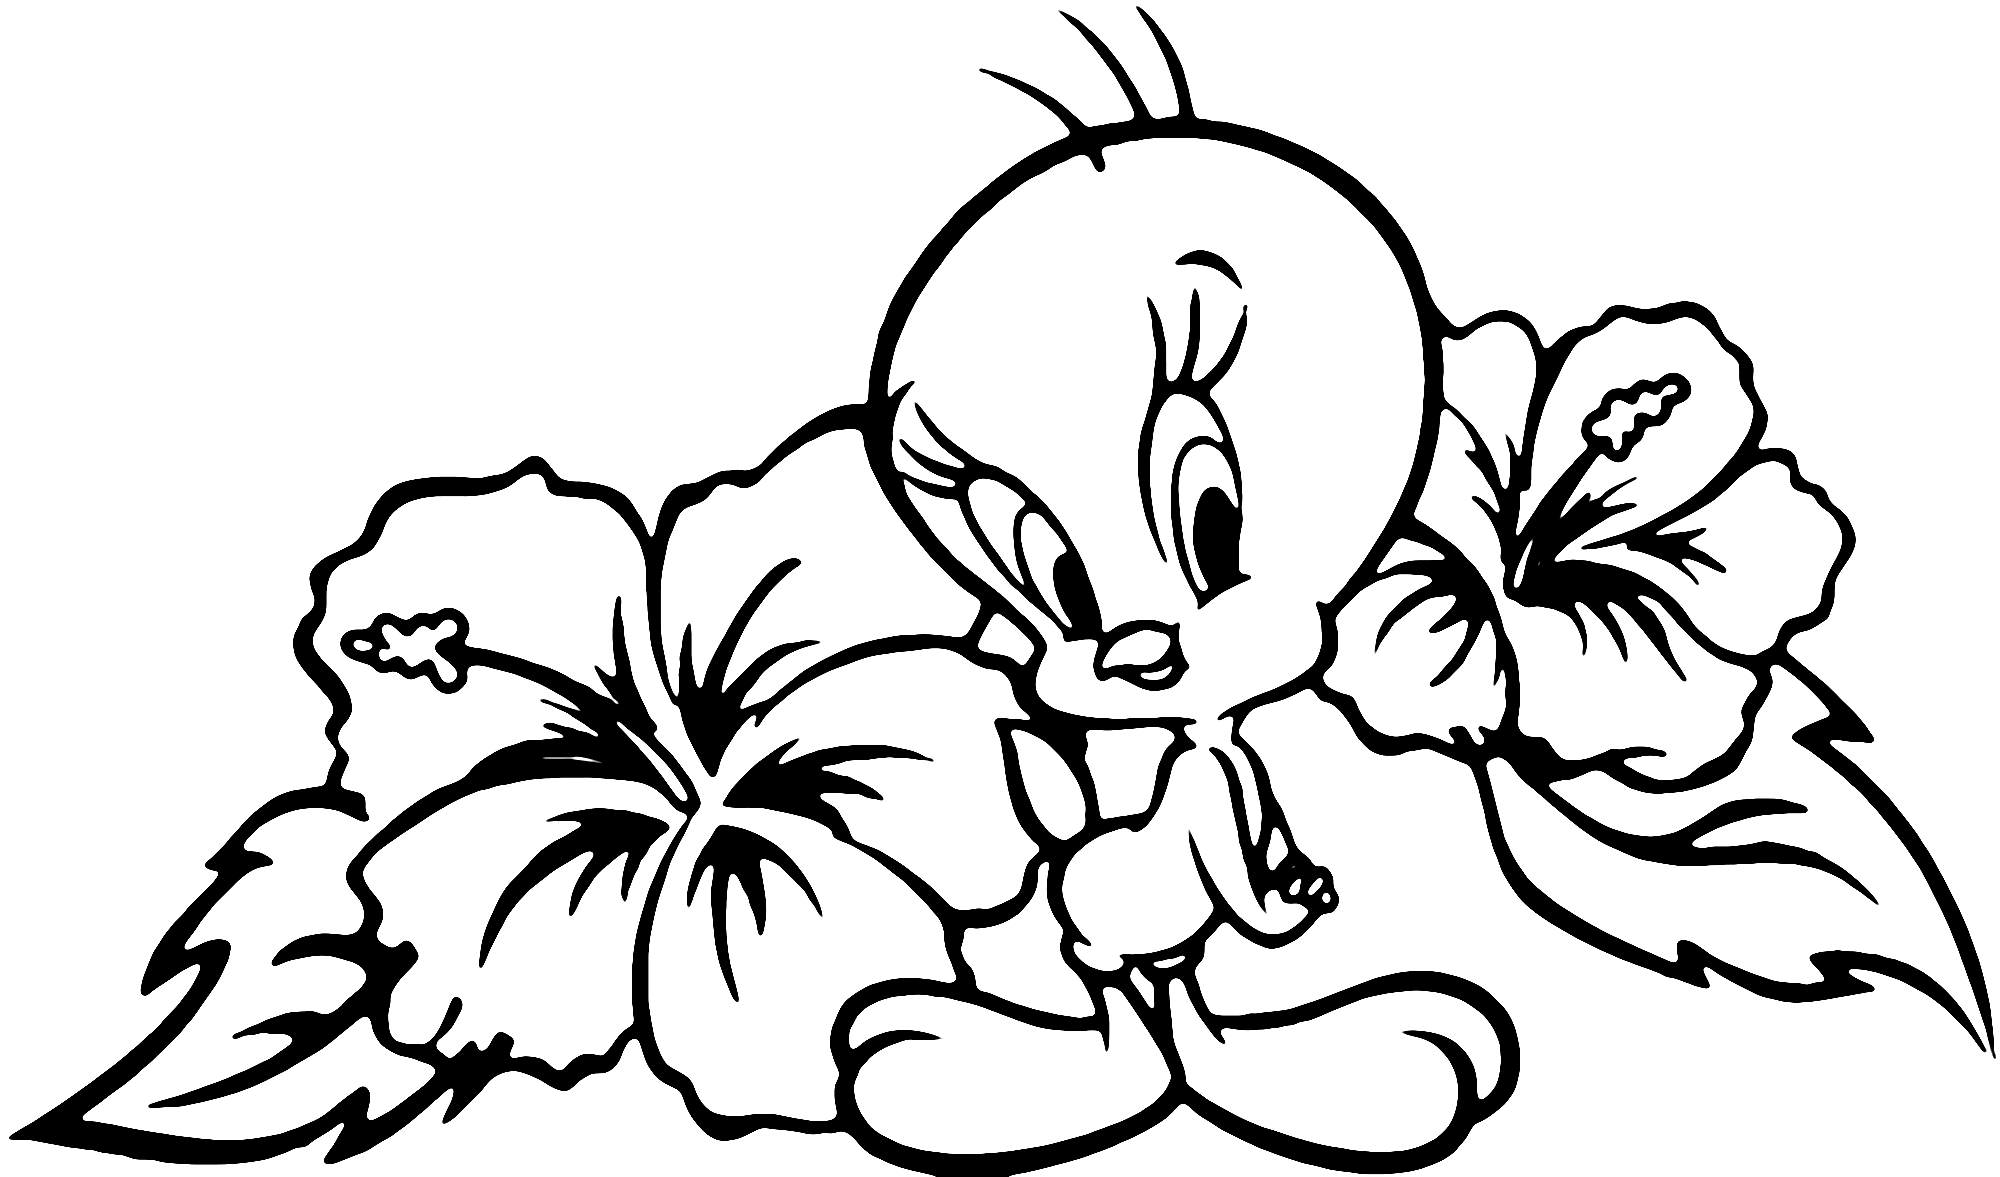 Coloring Page of Cute Tweety Bird with Flowers